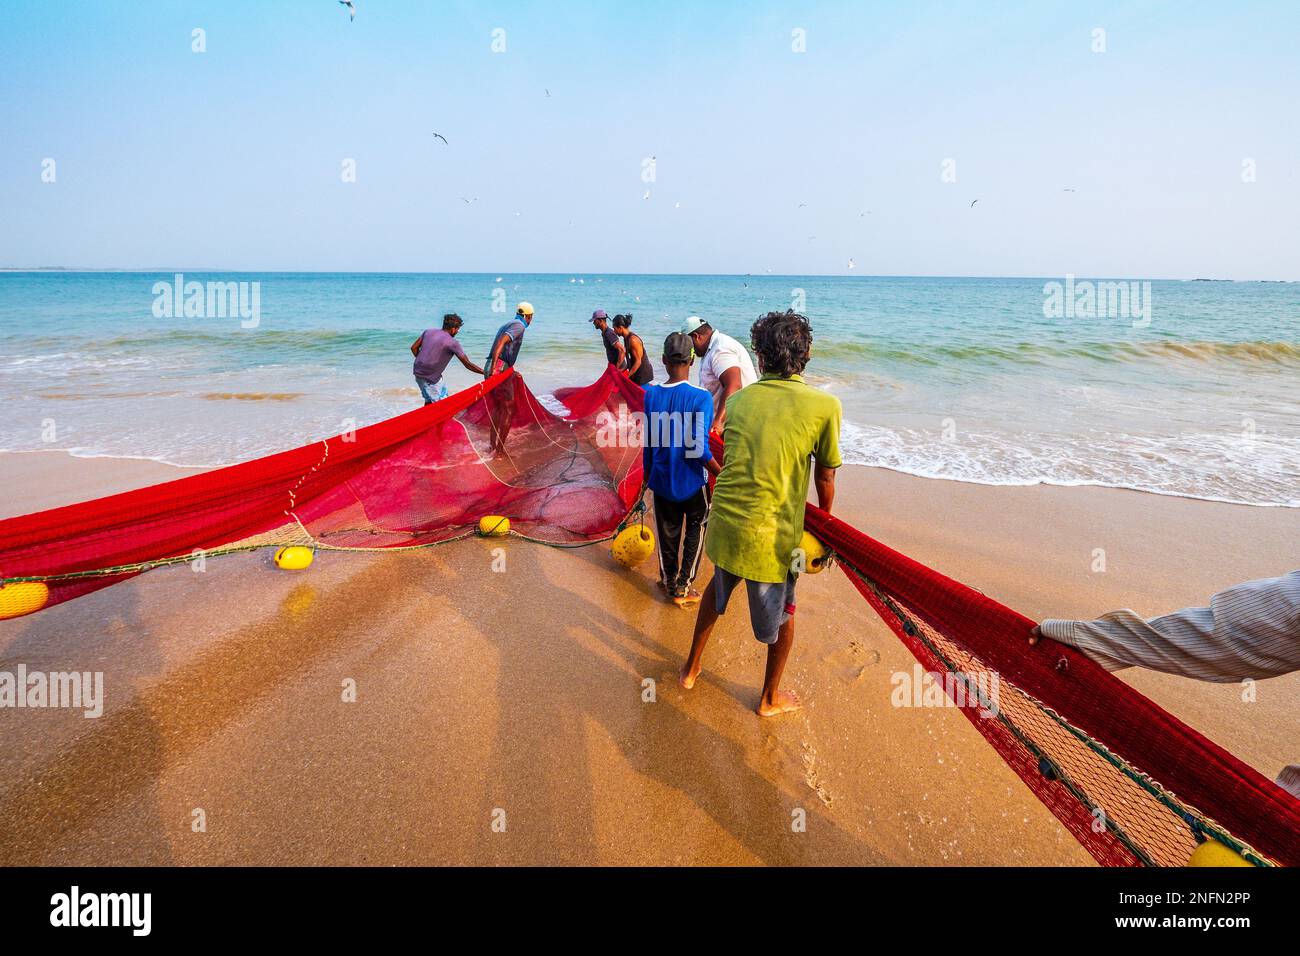 Fishermen hauling in a net on the beach at Tangalle on the south coast of Sri Lanka Stock Photo